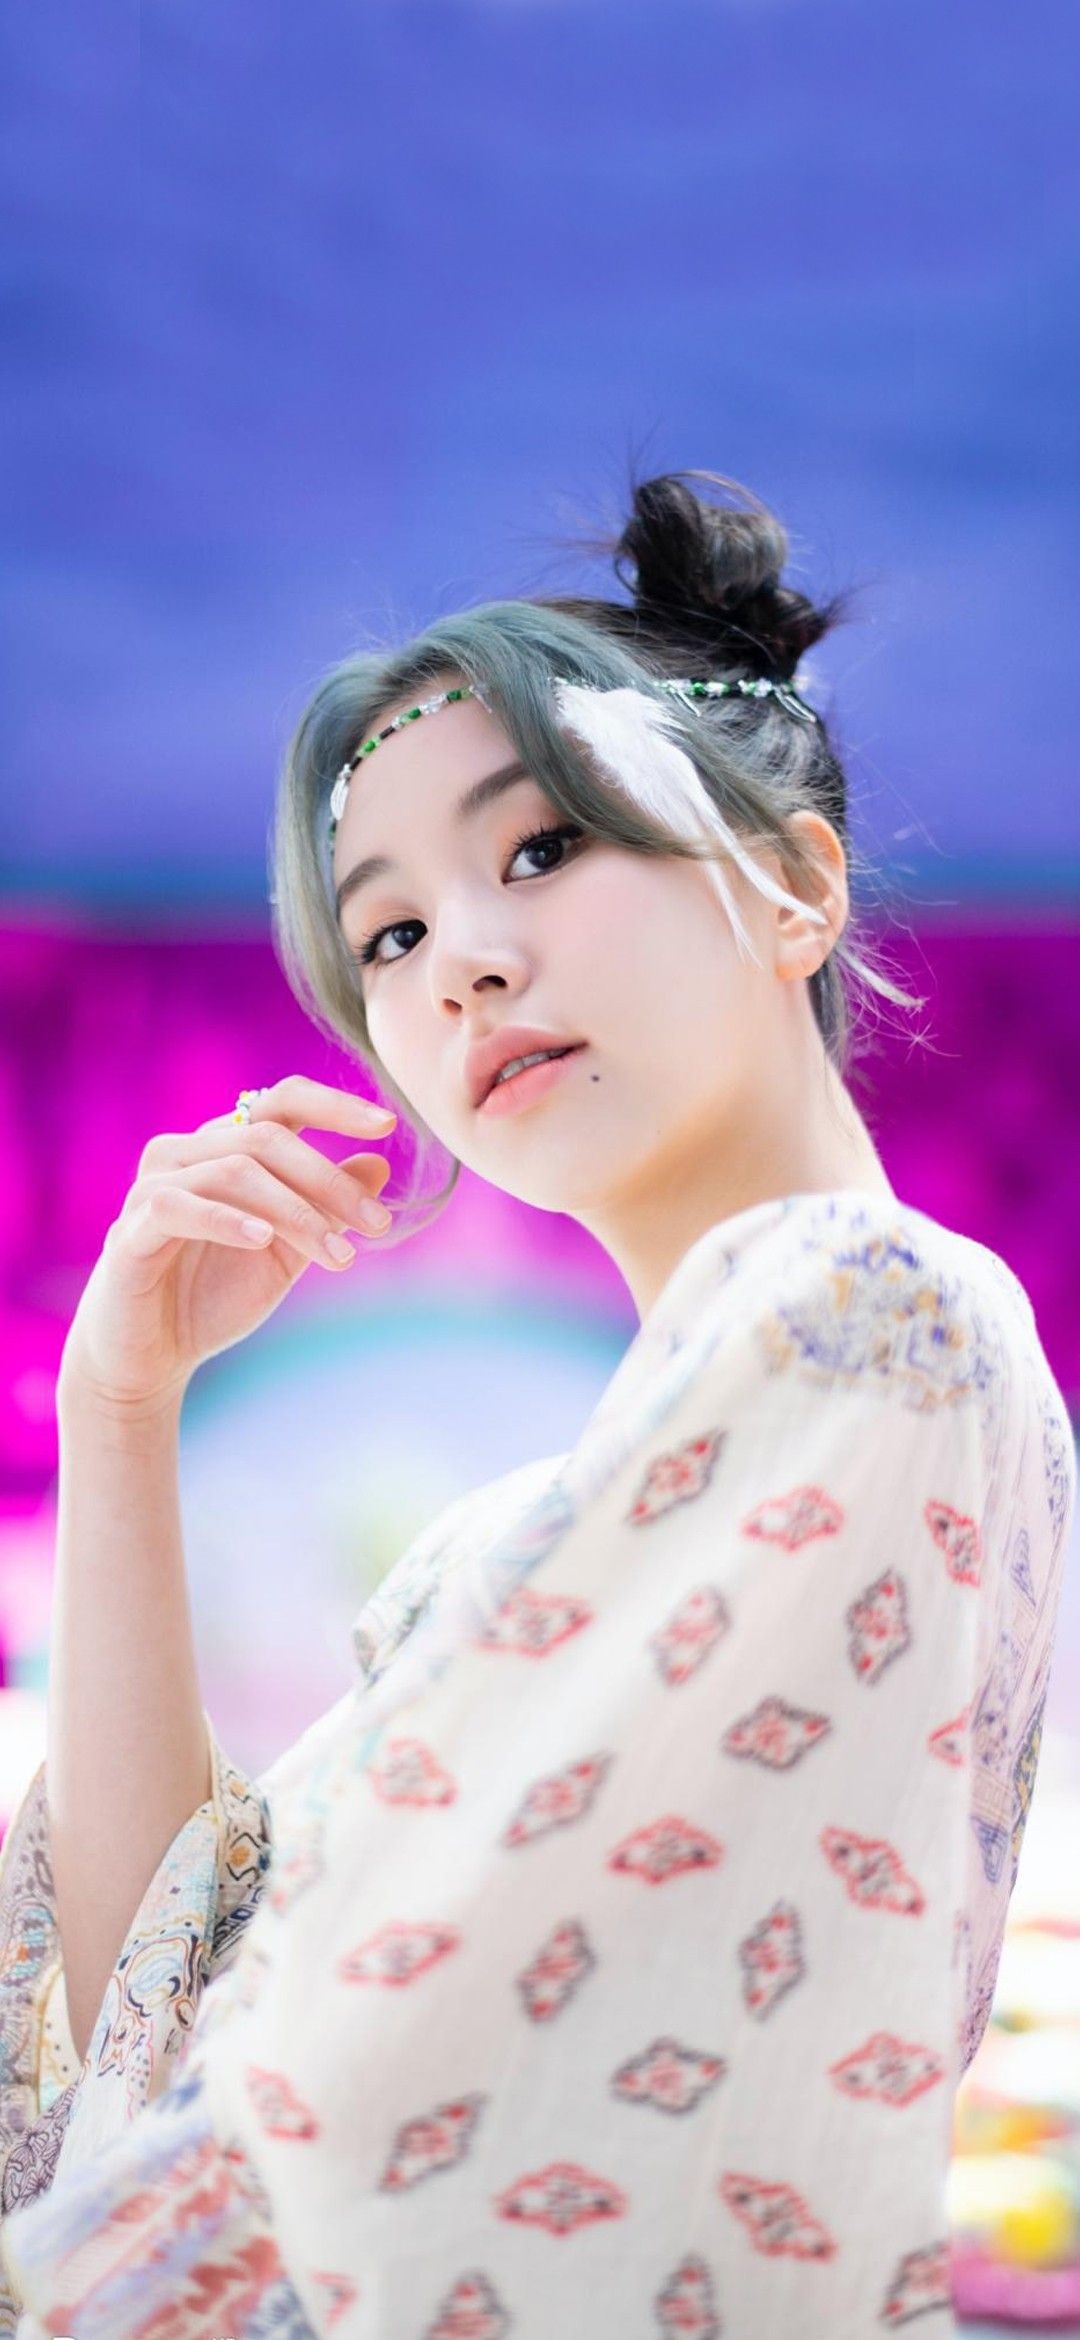 Chaeyoung in TWICE, Chaeyoung wallpaper, TWICE kpop girl group, Kpop bands, 1080x2340 HD Phone